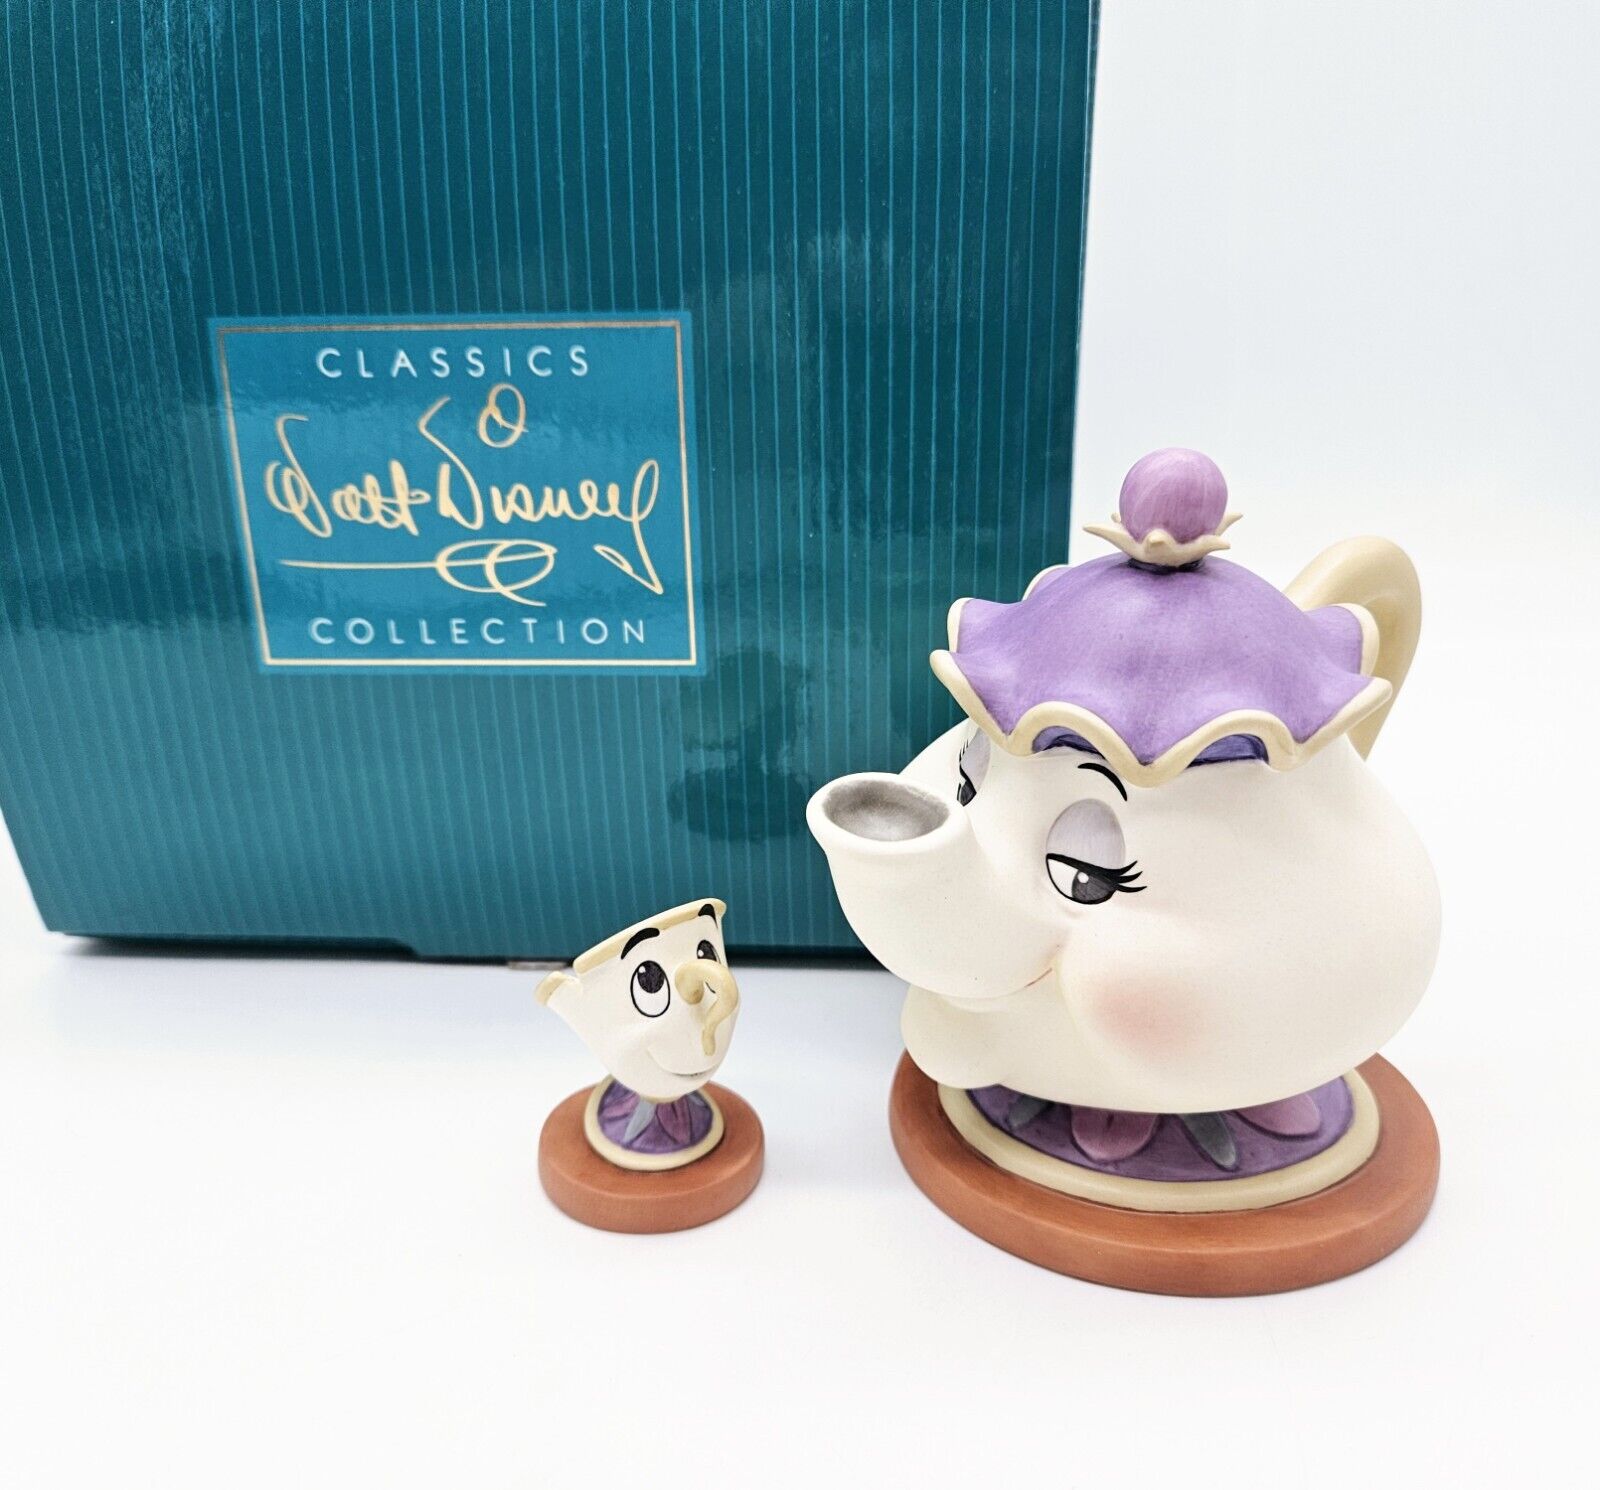 WDCC Disney Porcelain Figurine Goodnight Luv Mrs Potts and Chip in Box